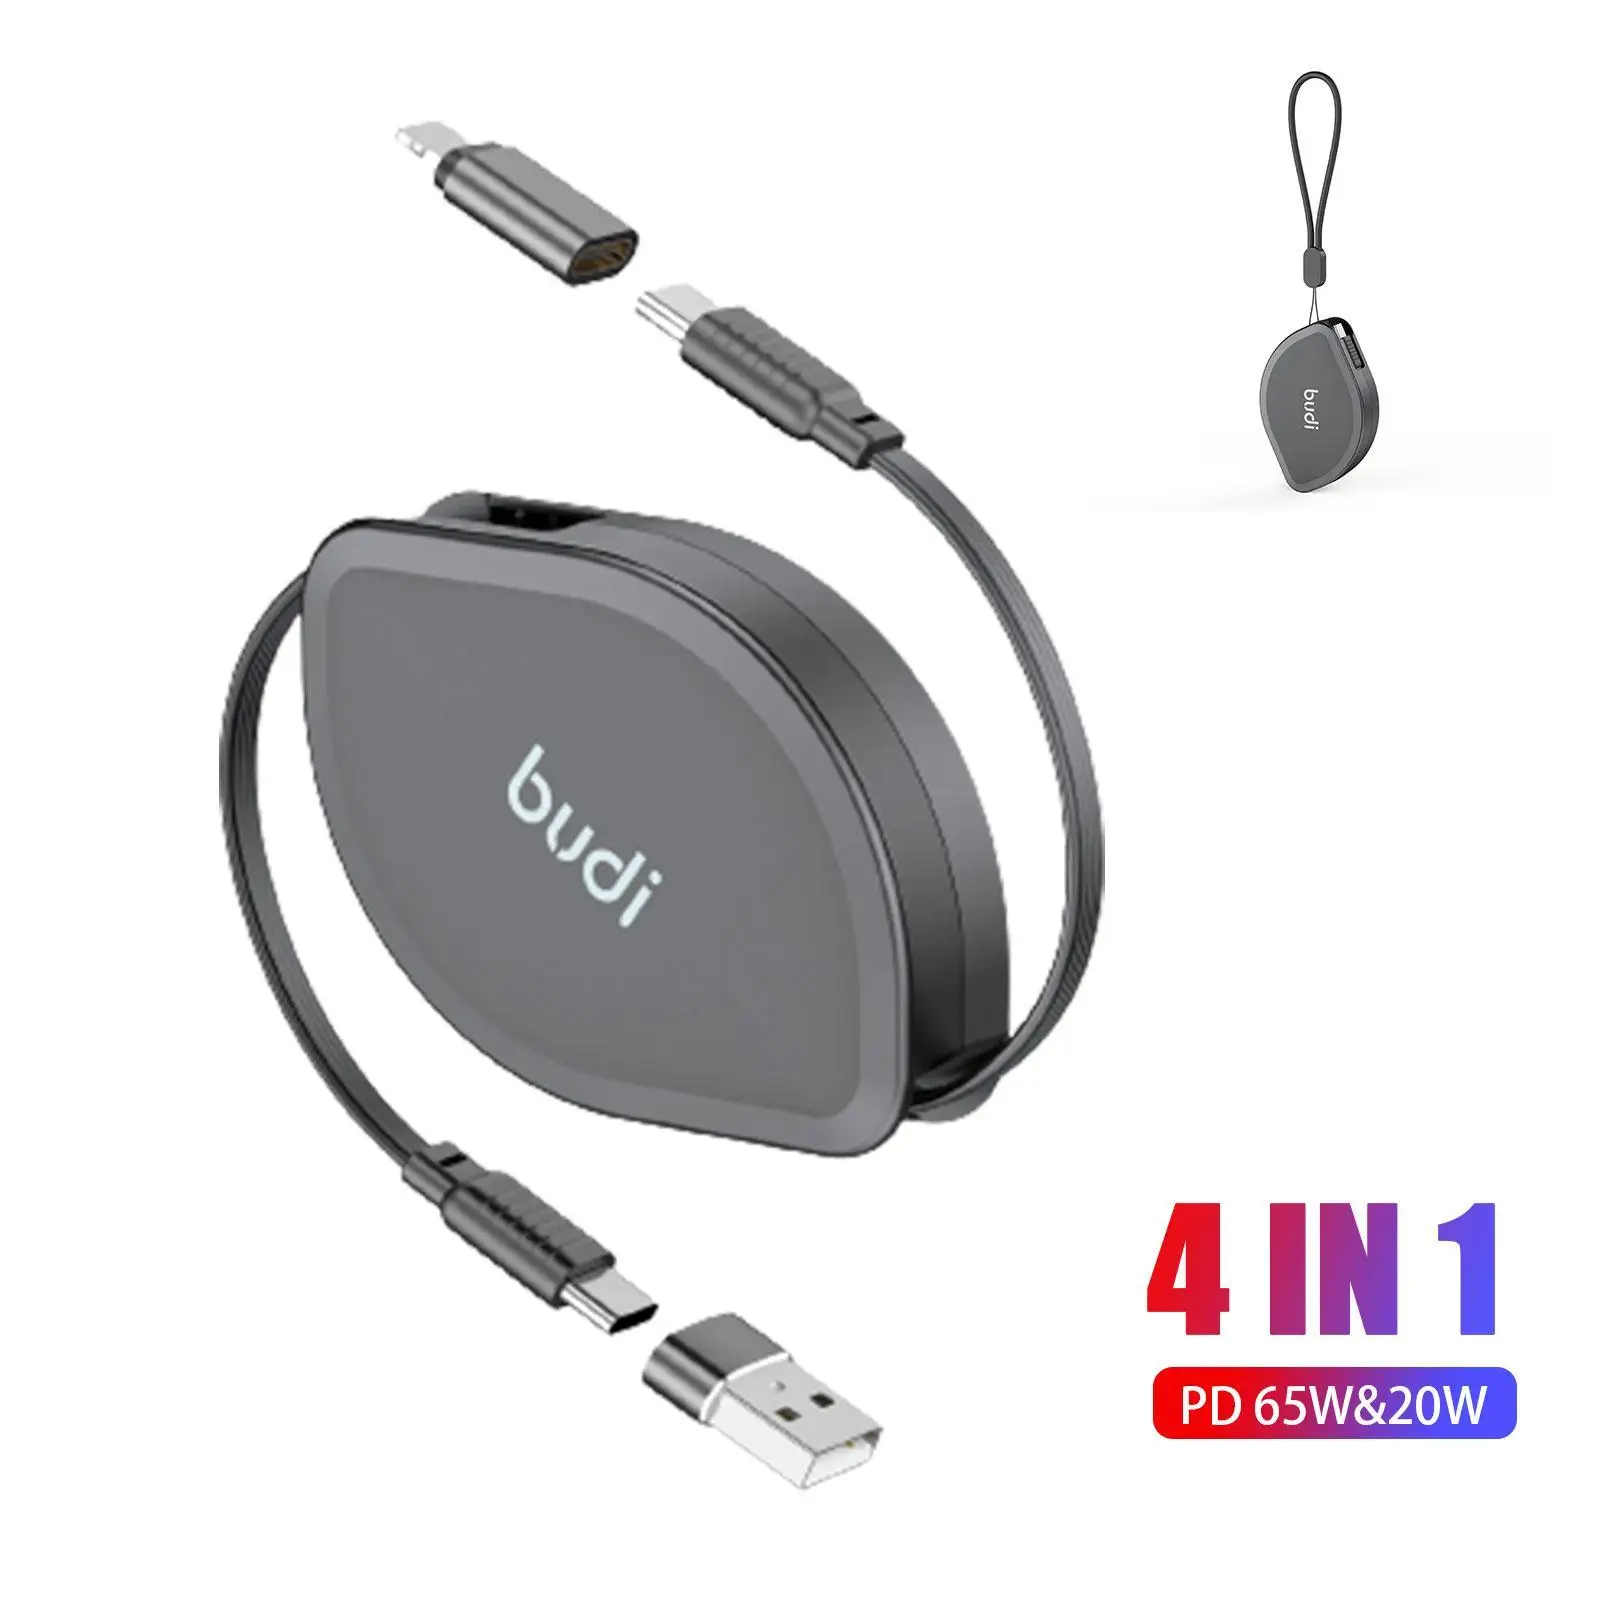 

BUDI 4 In1 PD 65W&20W Retractable USB C PD Type C High-speed Charge Sync Cable Fast Charging Mobile Phone Accessories For IPhone